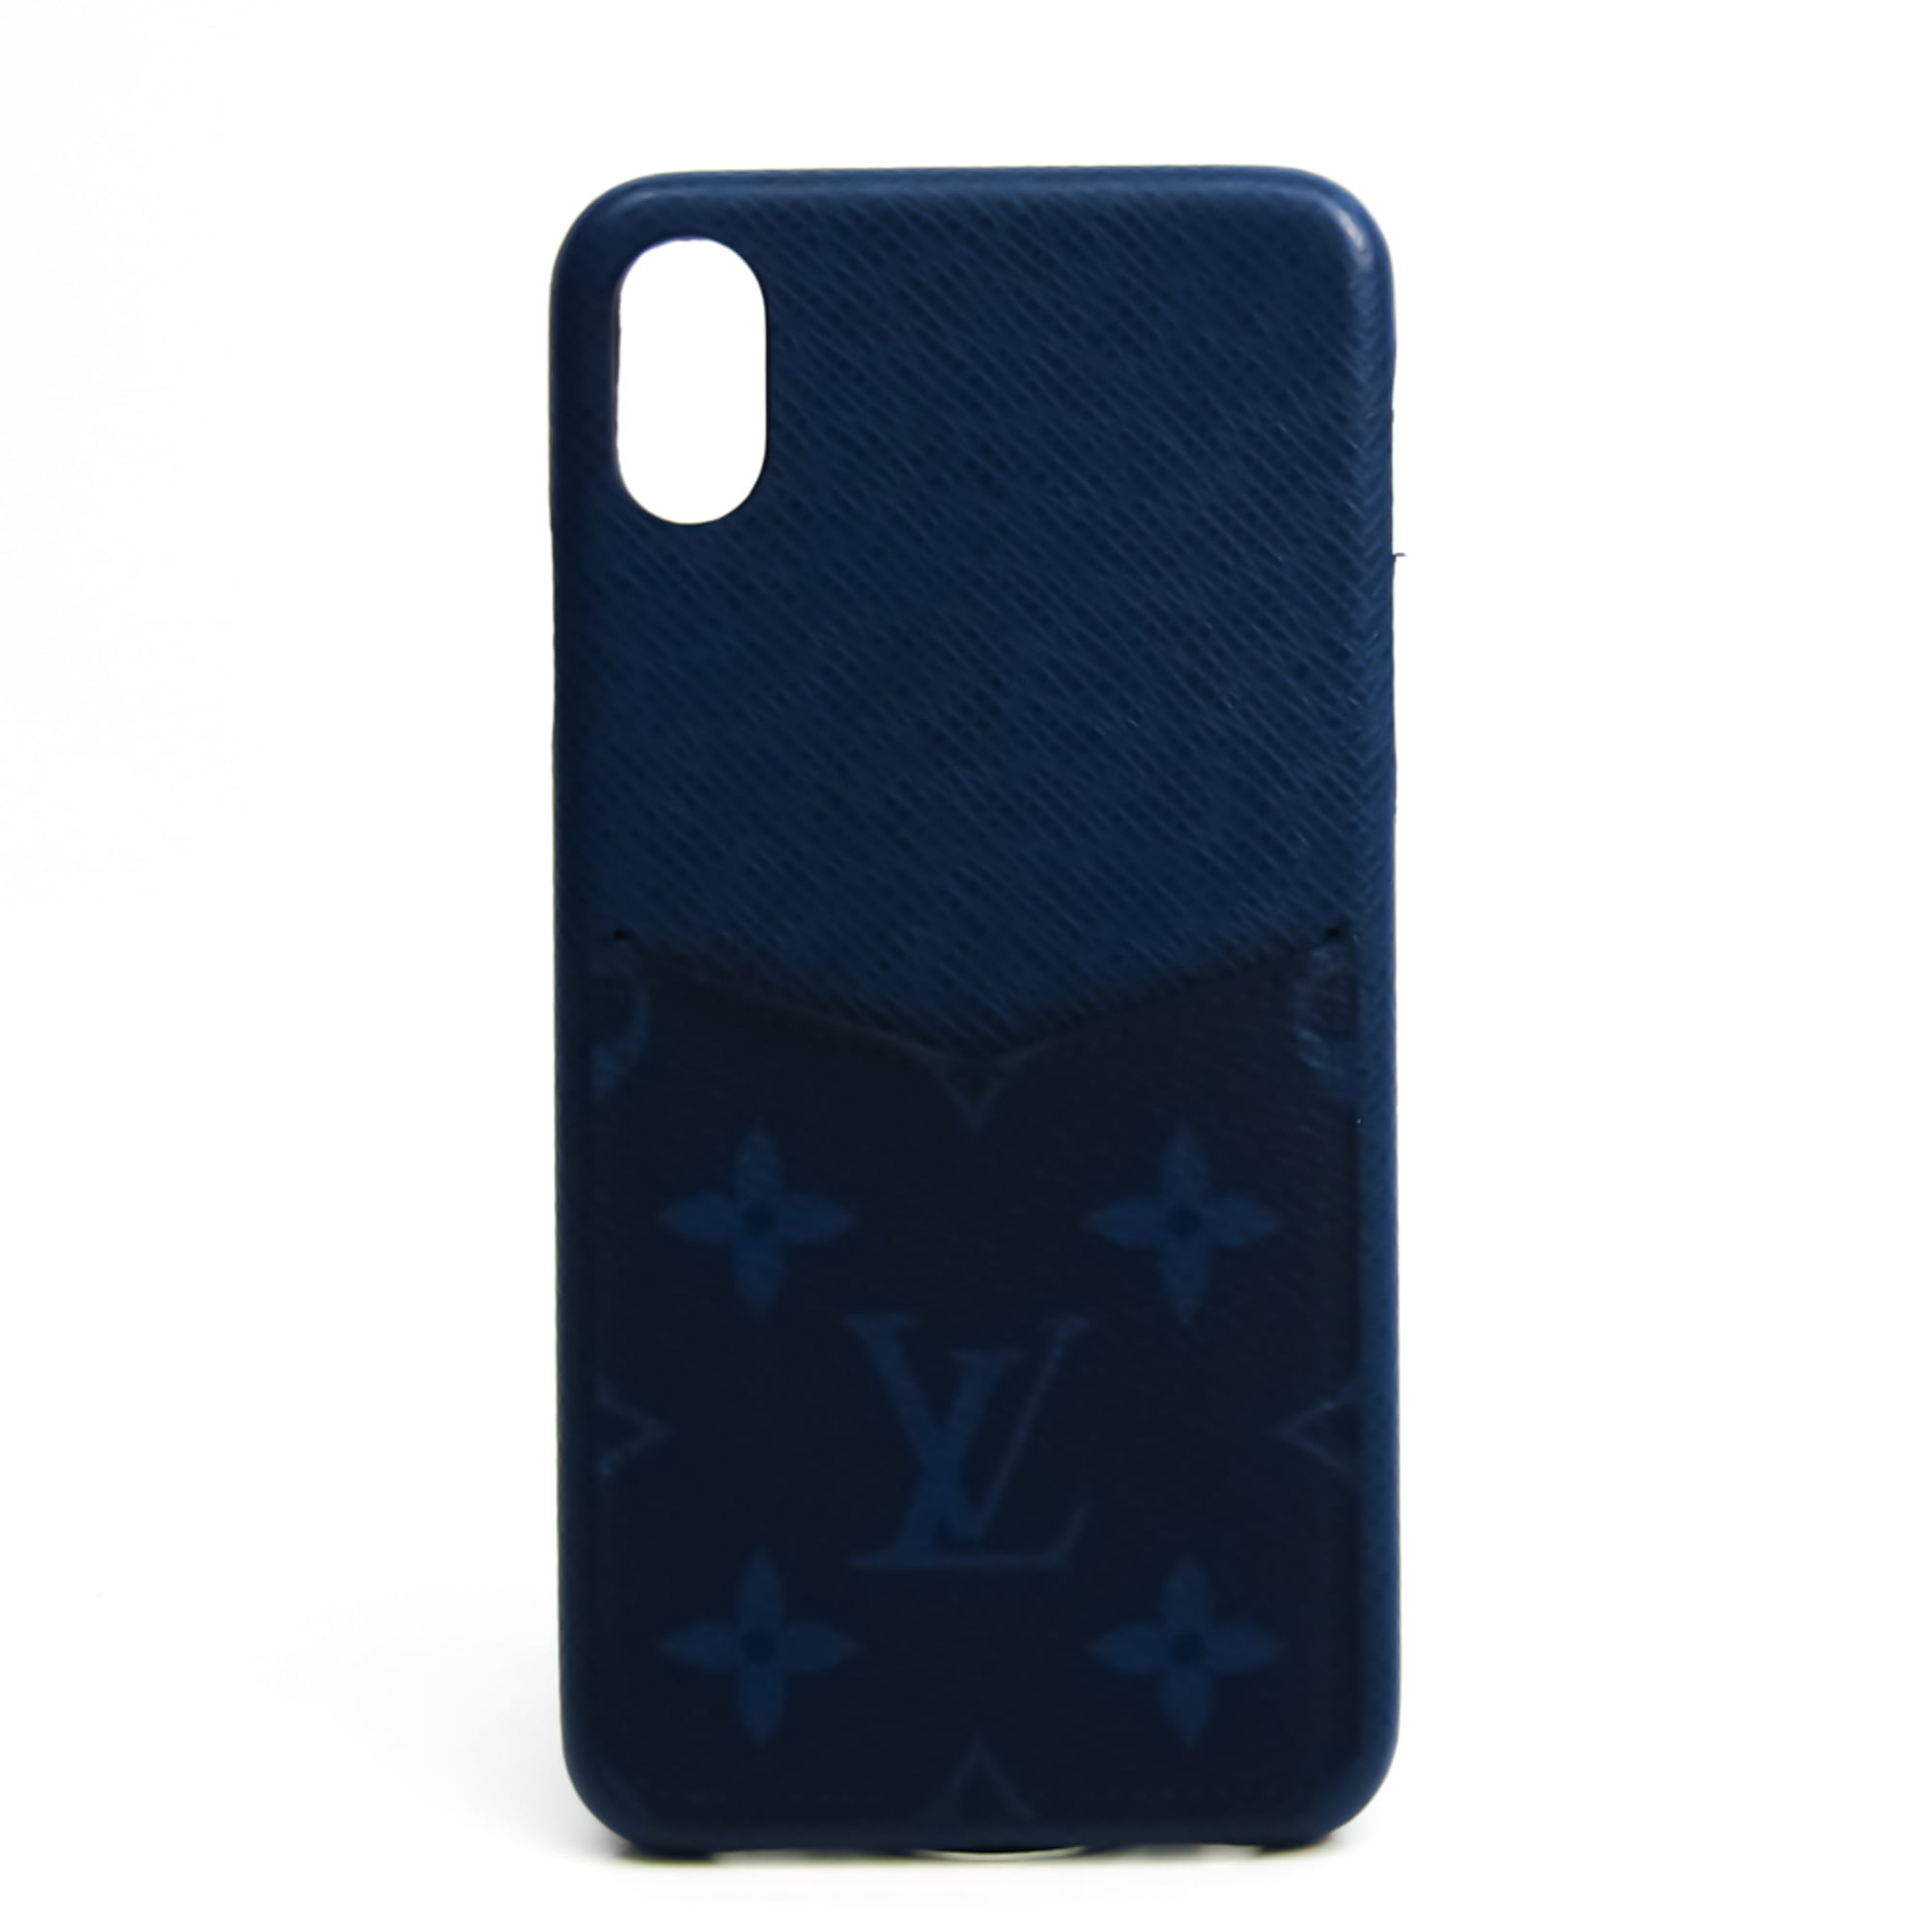 Authenticated Used Louis Vuitton Monogram Taiga Leather Phone Bumper For  IPhone XS Max Cobalt IPHONE Bumper XS Max M30273 